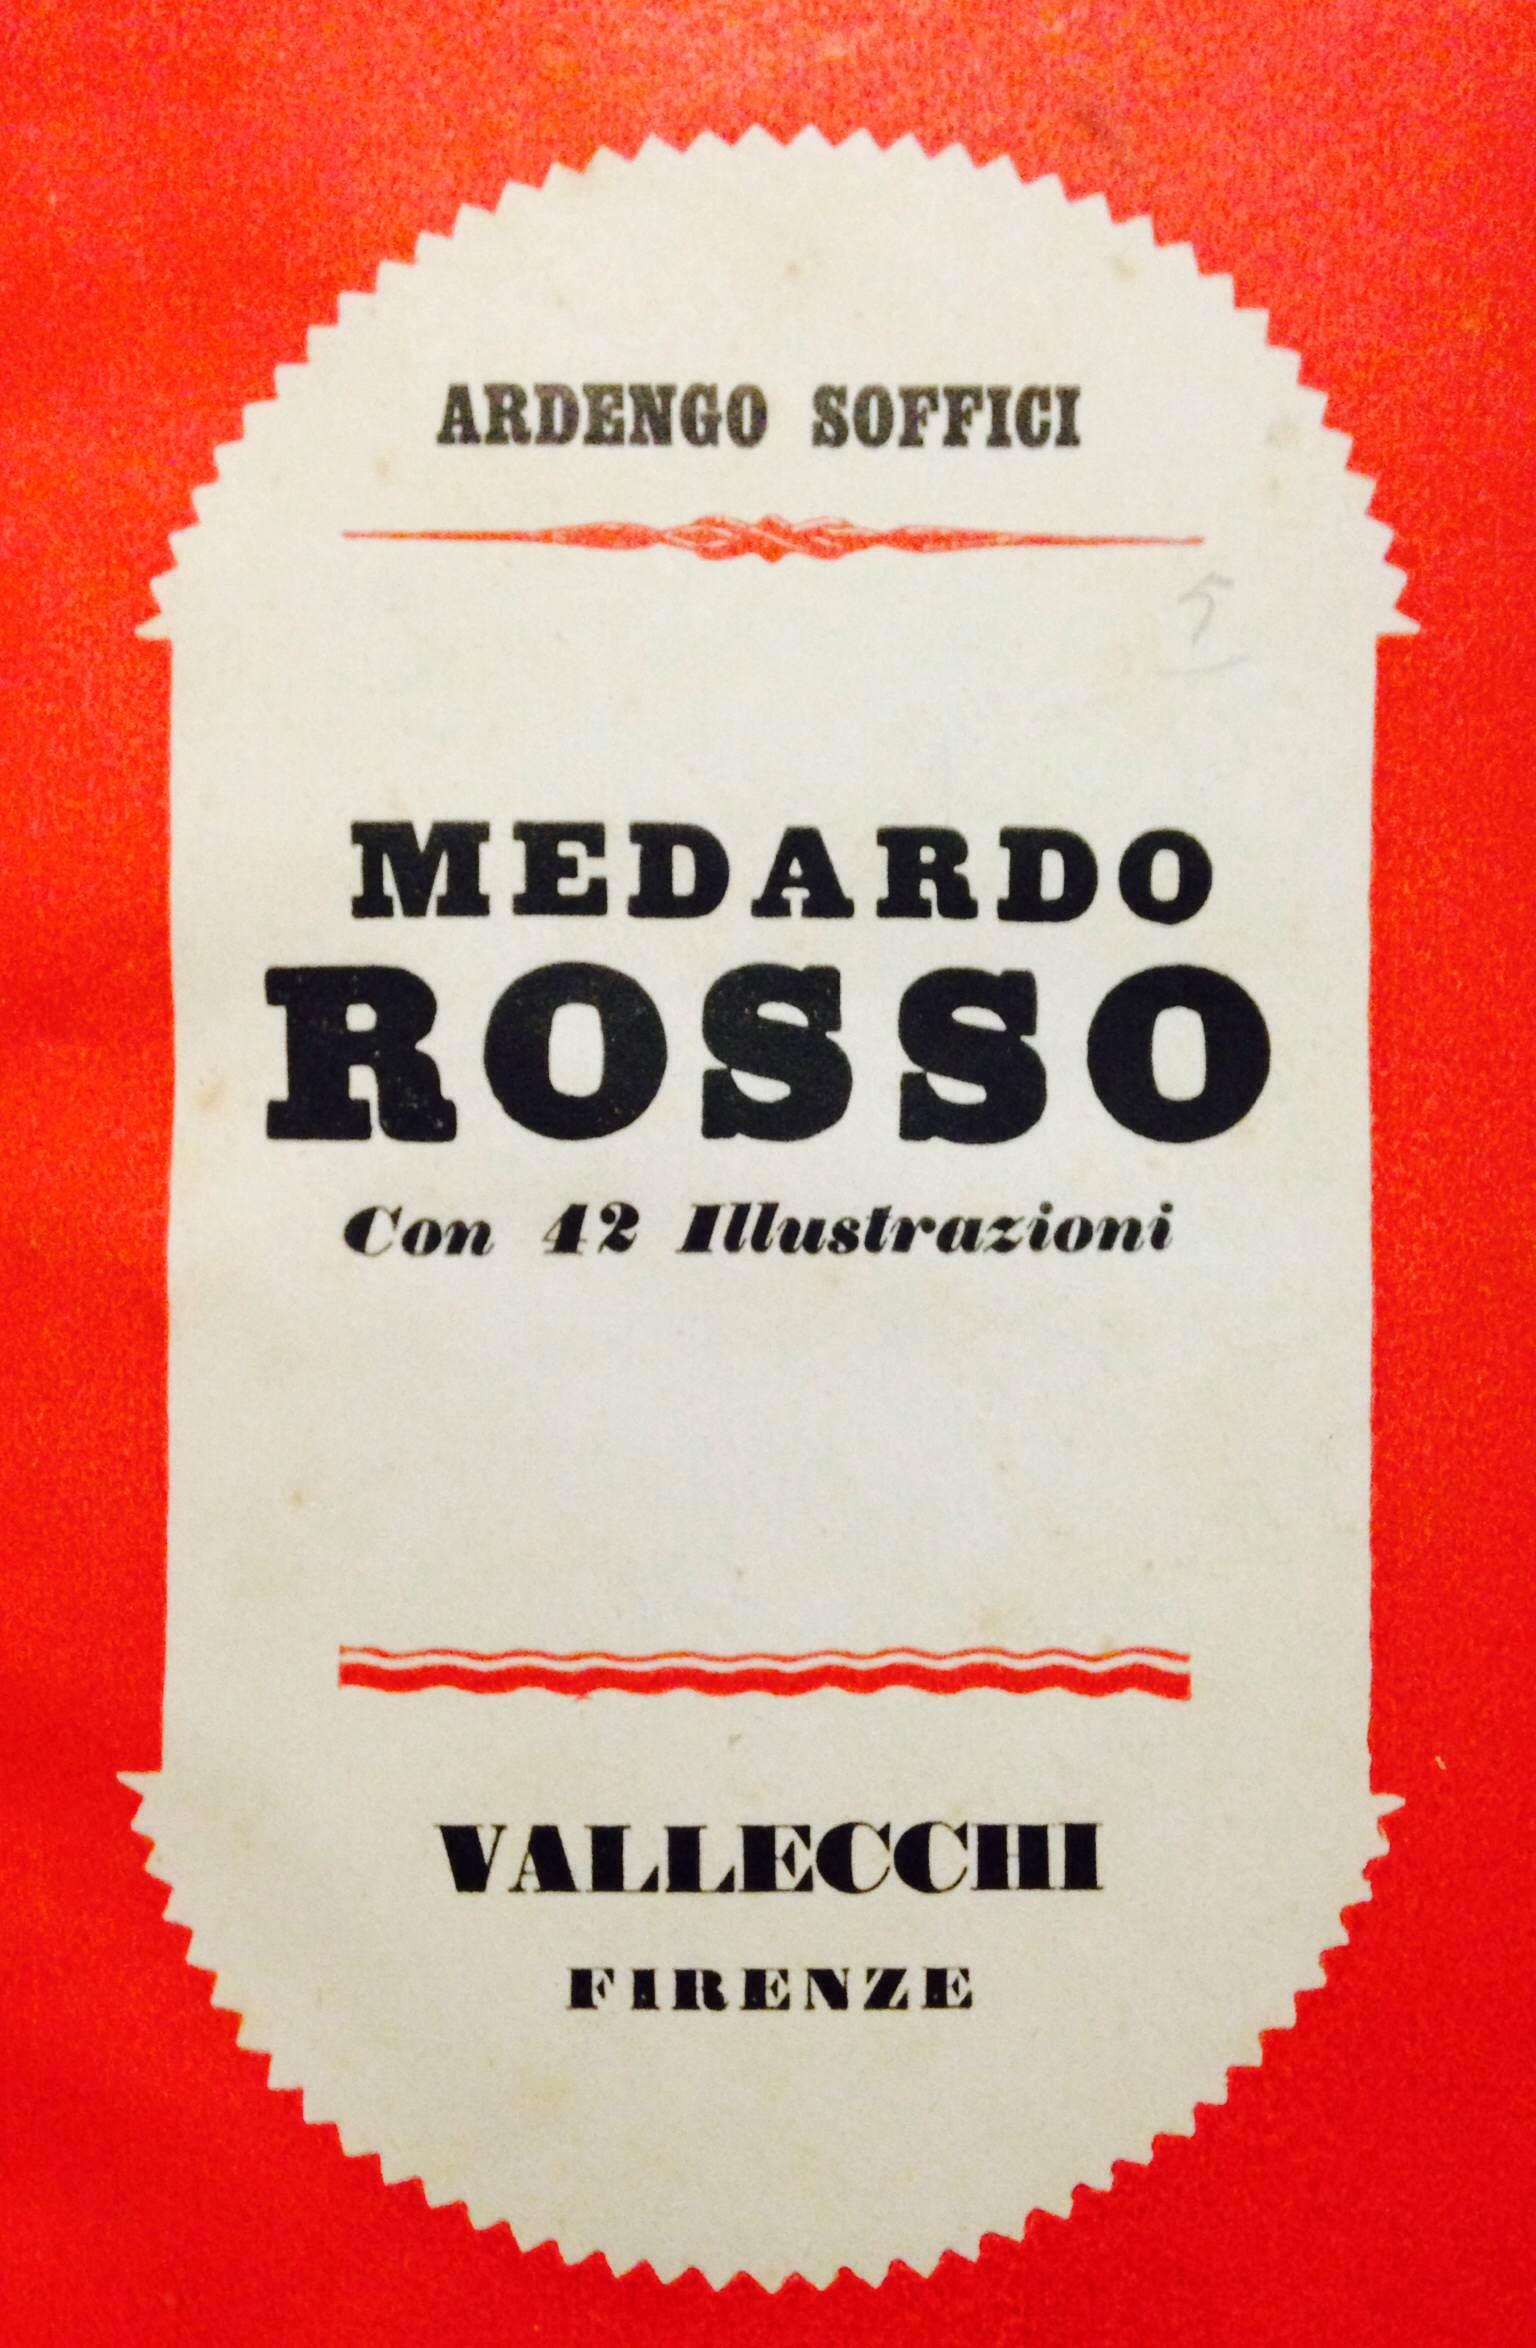 Original edition including 42 illustrations of the works by the artist. Famous critical essay by Ardengo Soffici on one of the main sculptores of his age, Medardo Rosso (Torino, 1858- Milano, 1928). From the Countess Anna Laetitia Pecci Blunt